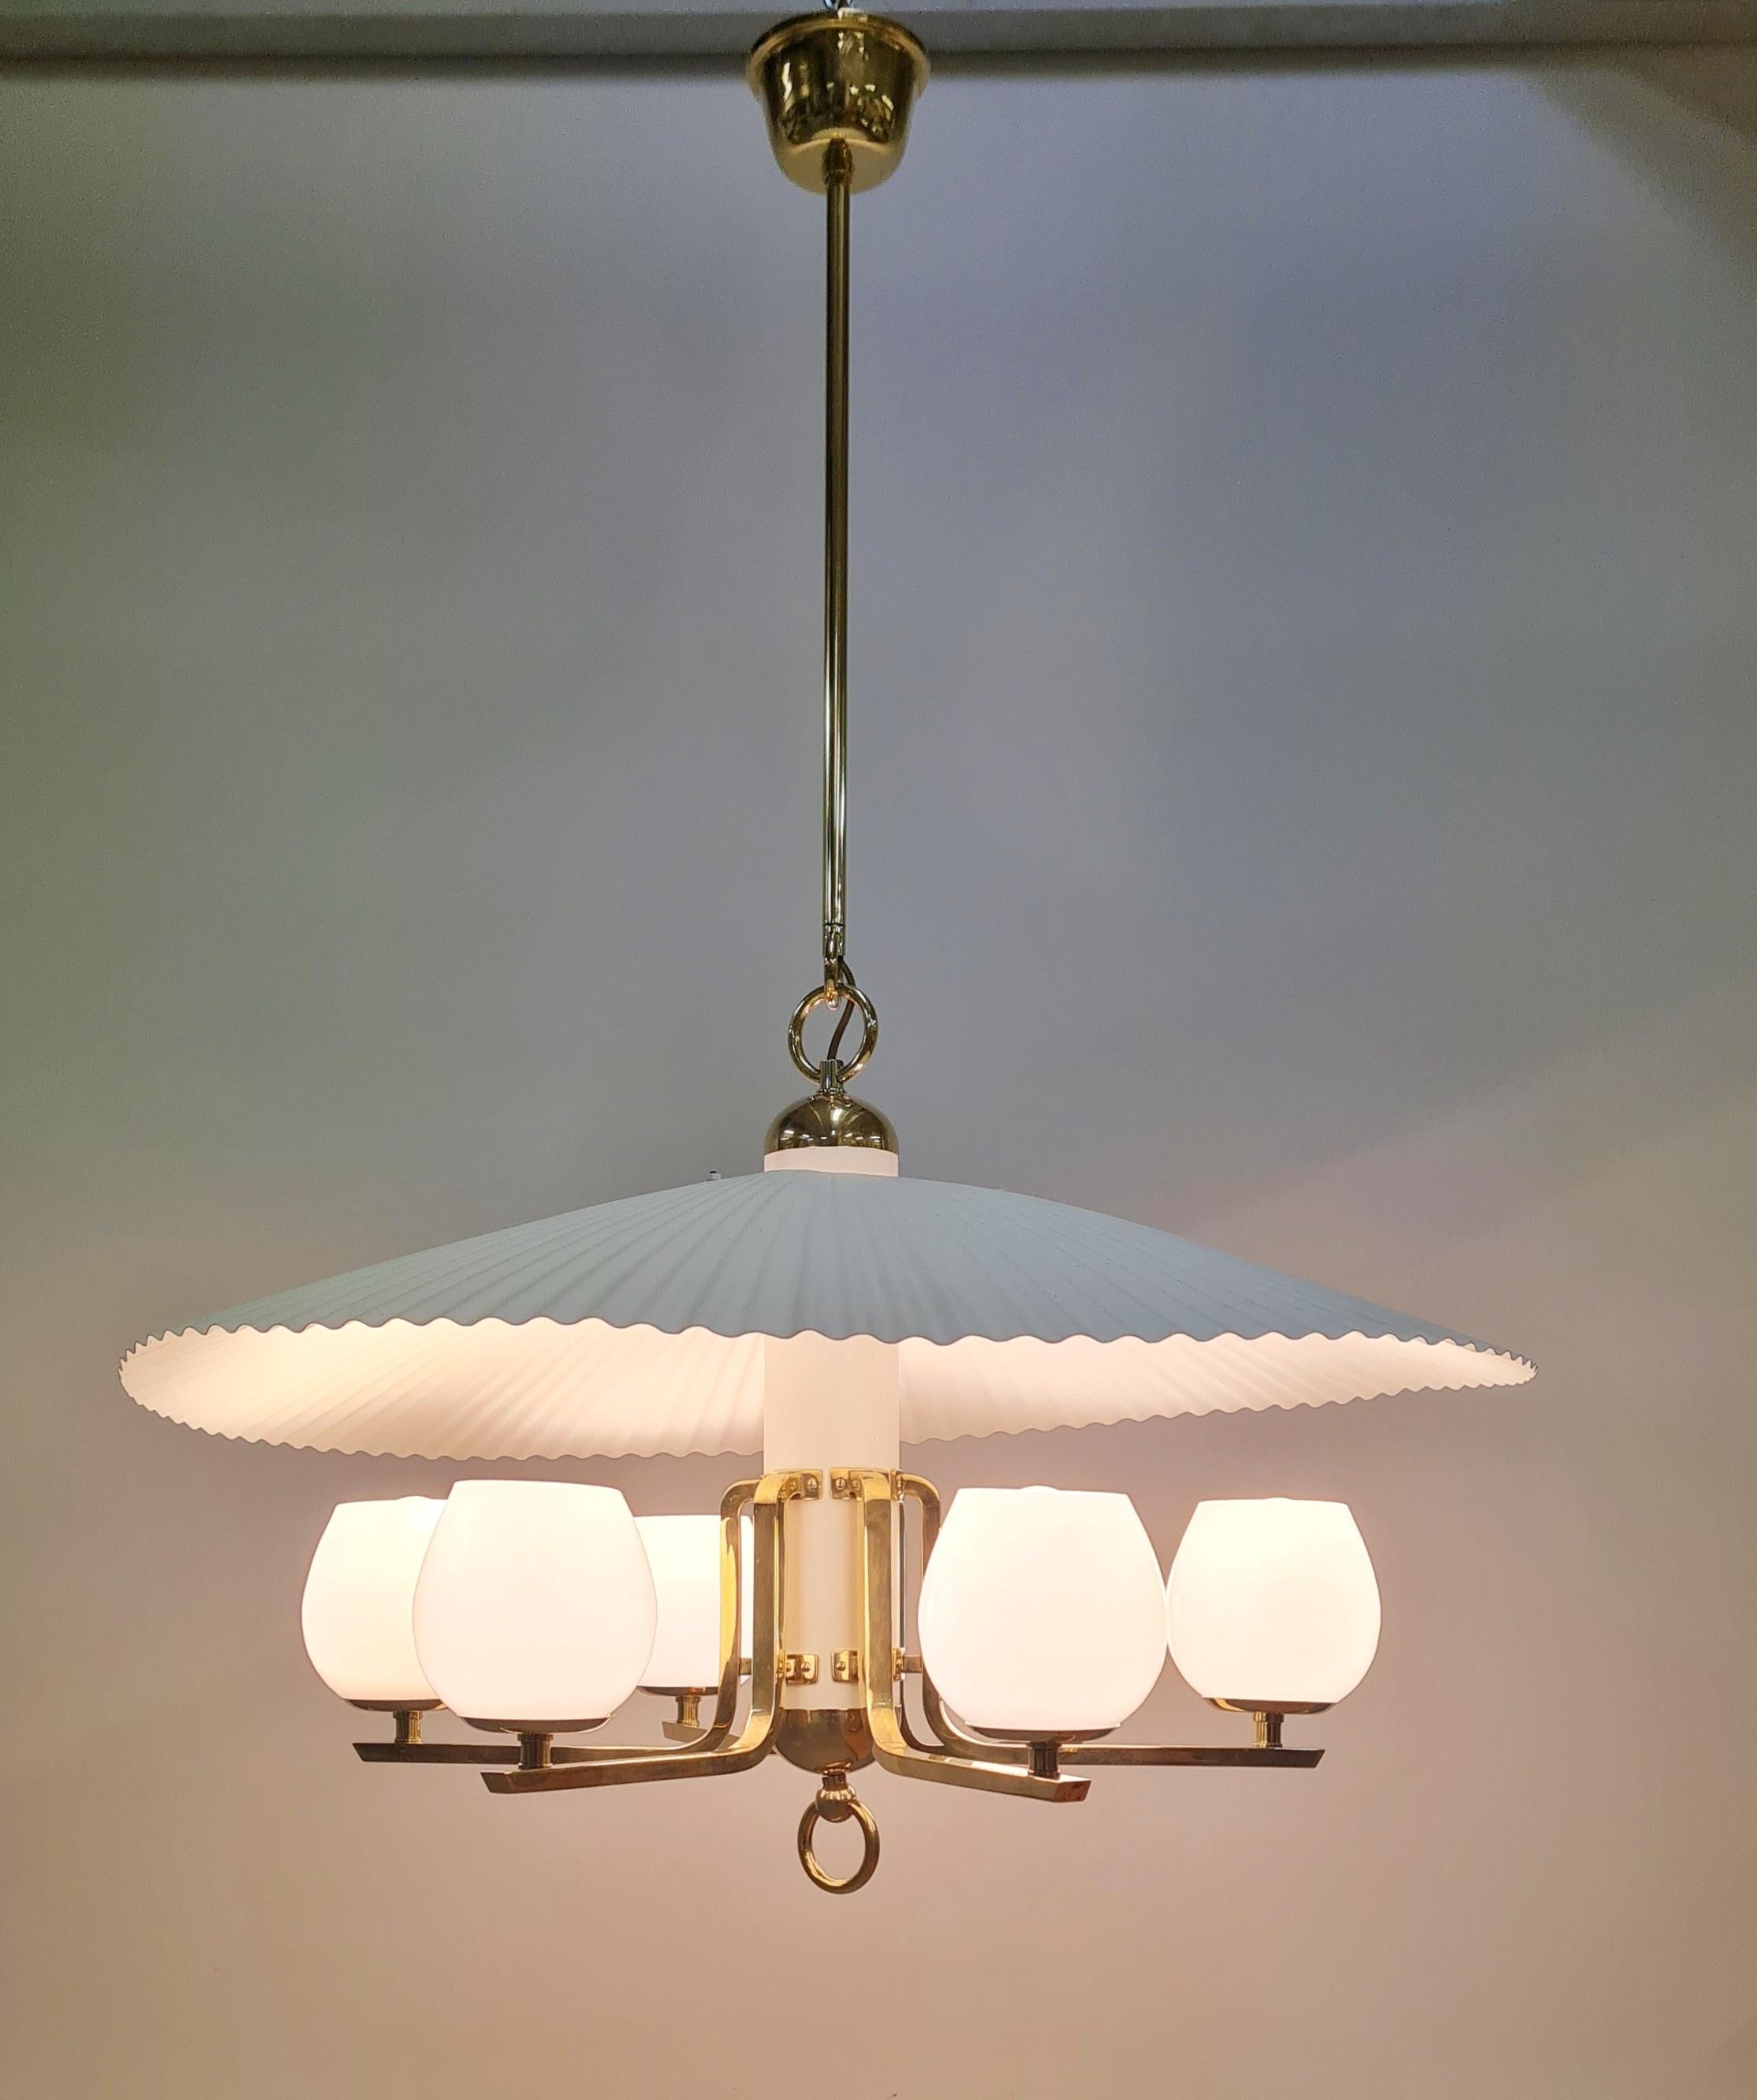 Mid-Century Modern A Comissioned Paavo Tynell Ceiling Lamp, Taito, 1940s For Sale